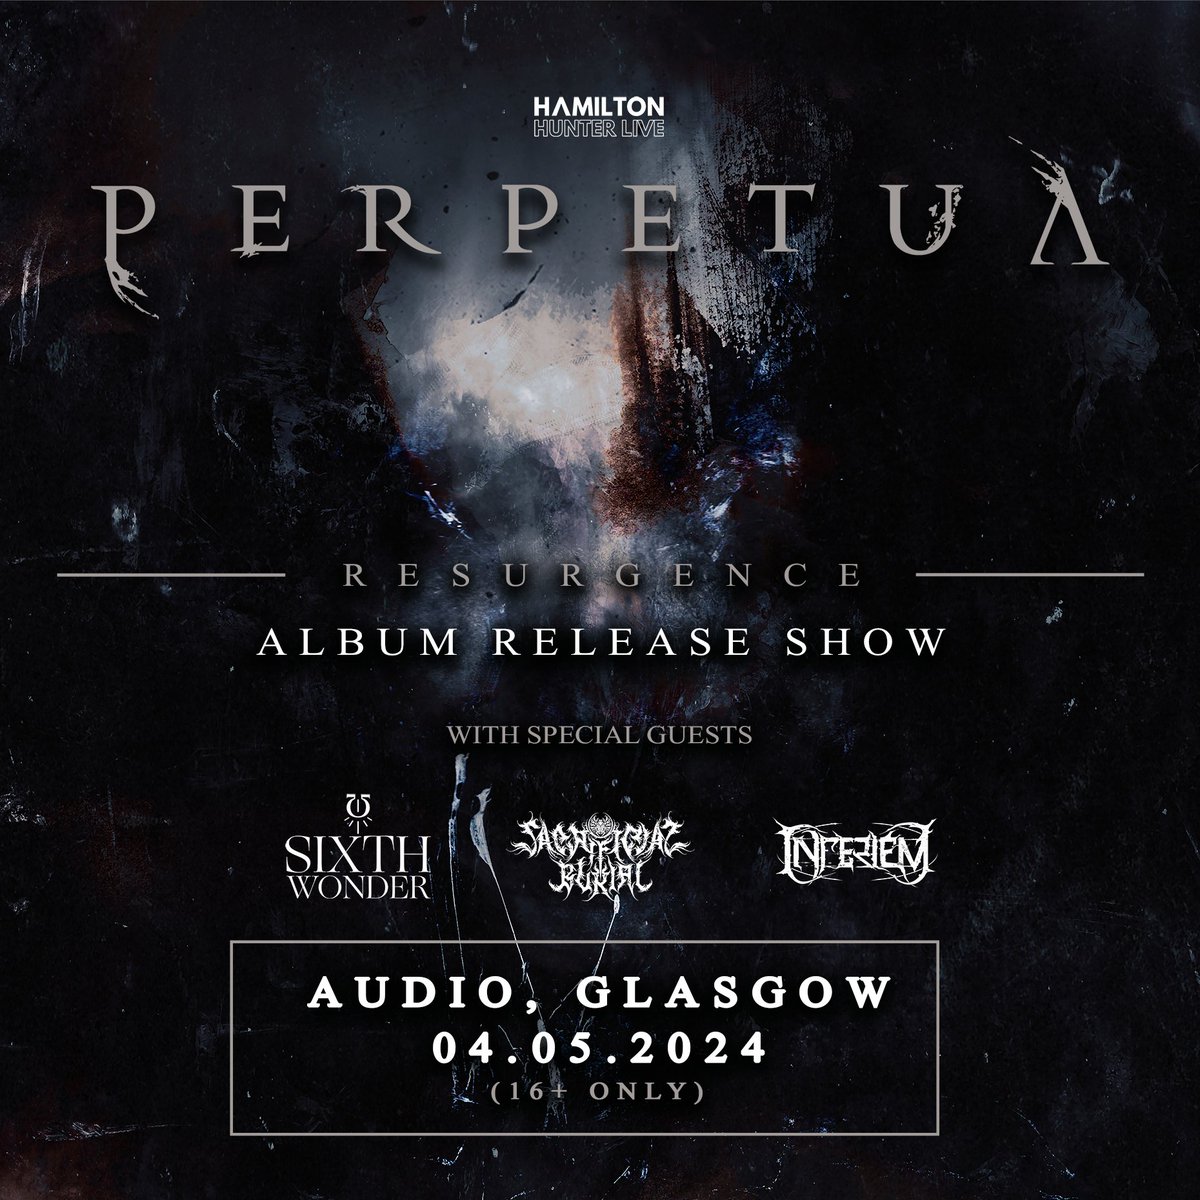 🚨𝗦𝗨𝗣𝗣𝗢𝗥𝗧 𝗔𝗡𝗡𝗢𝗨𝗡𝗖𝗘𝗠𝗘𝗡𝗧 -> Perpetua celebrate the release of album, 'Resurgence' on May 4th, 2024! Sixth Wonder, Sacrificial Burial, and Inferiem join as support @ticketsscotland @scottishmetal @whatsonglasgow 🎫 𝗧𝗜𝗖𝗞𝗘𝗧𝗦 -> loom.ly/SsYF_ds